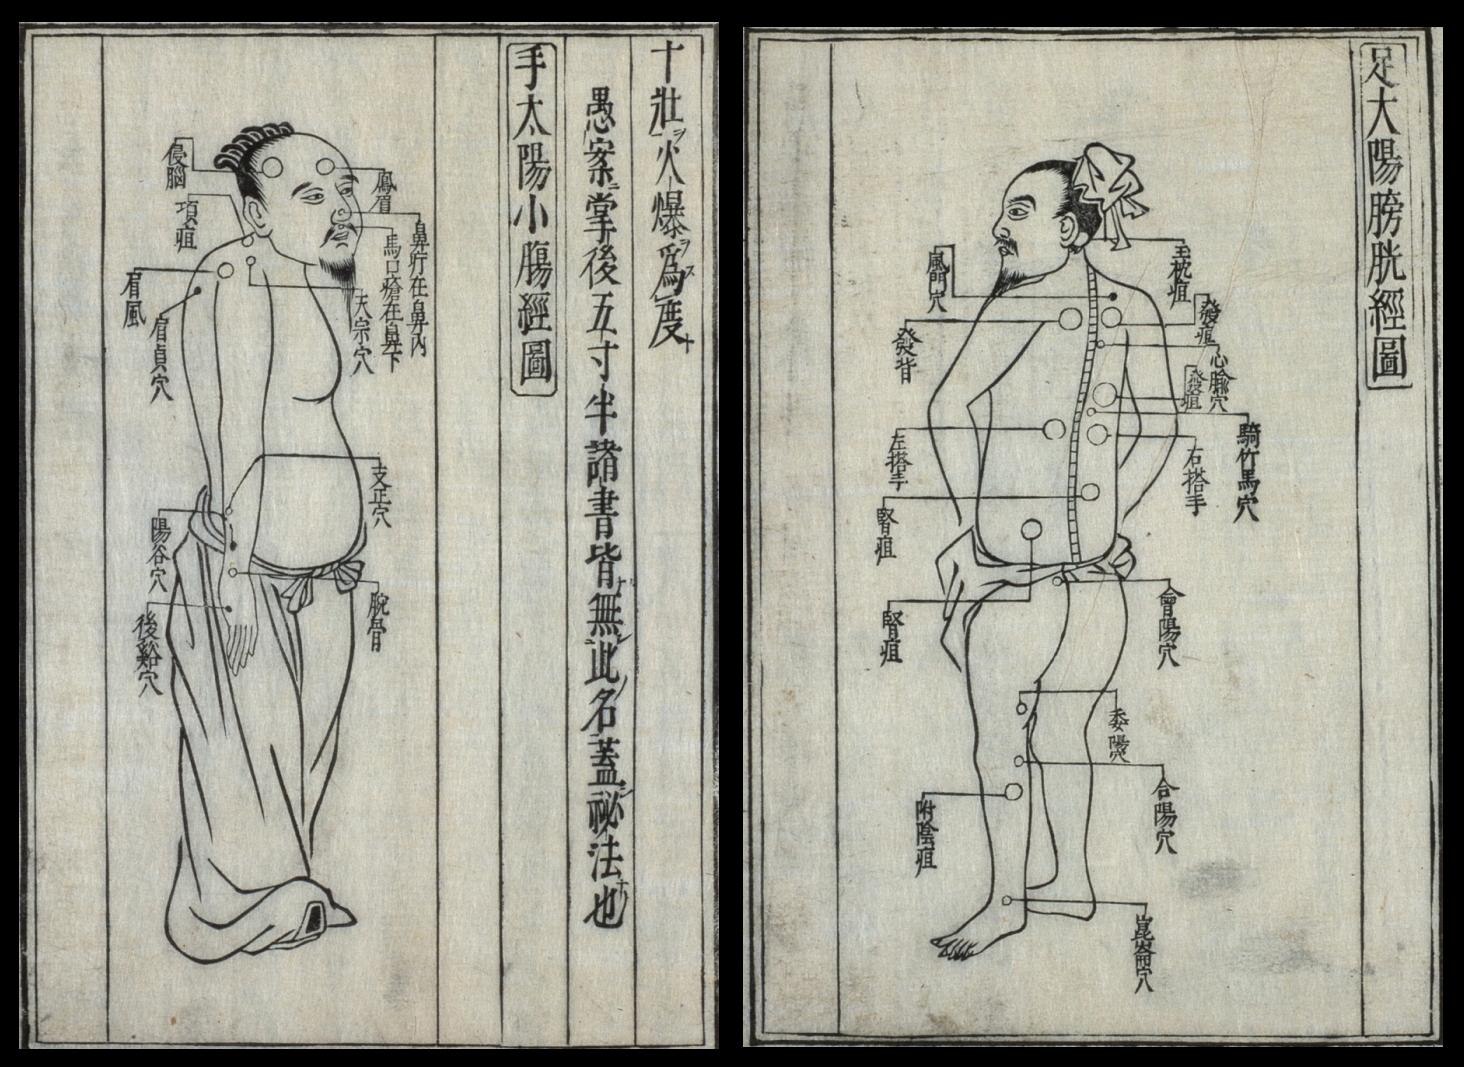 body energy points - Japanese rare medical text